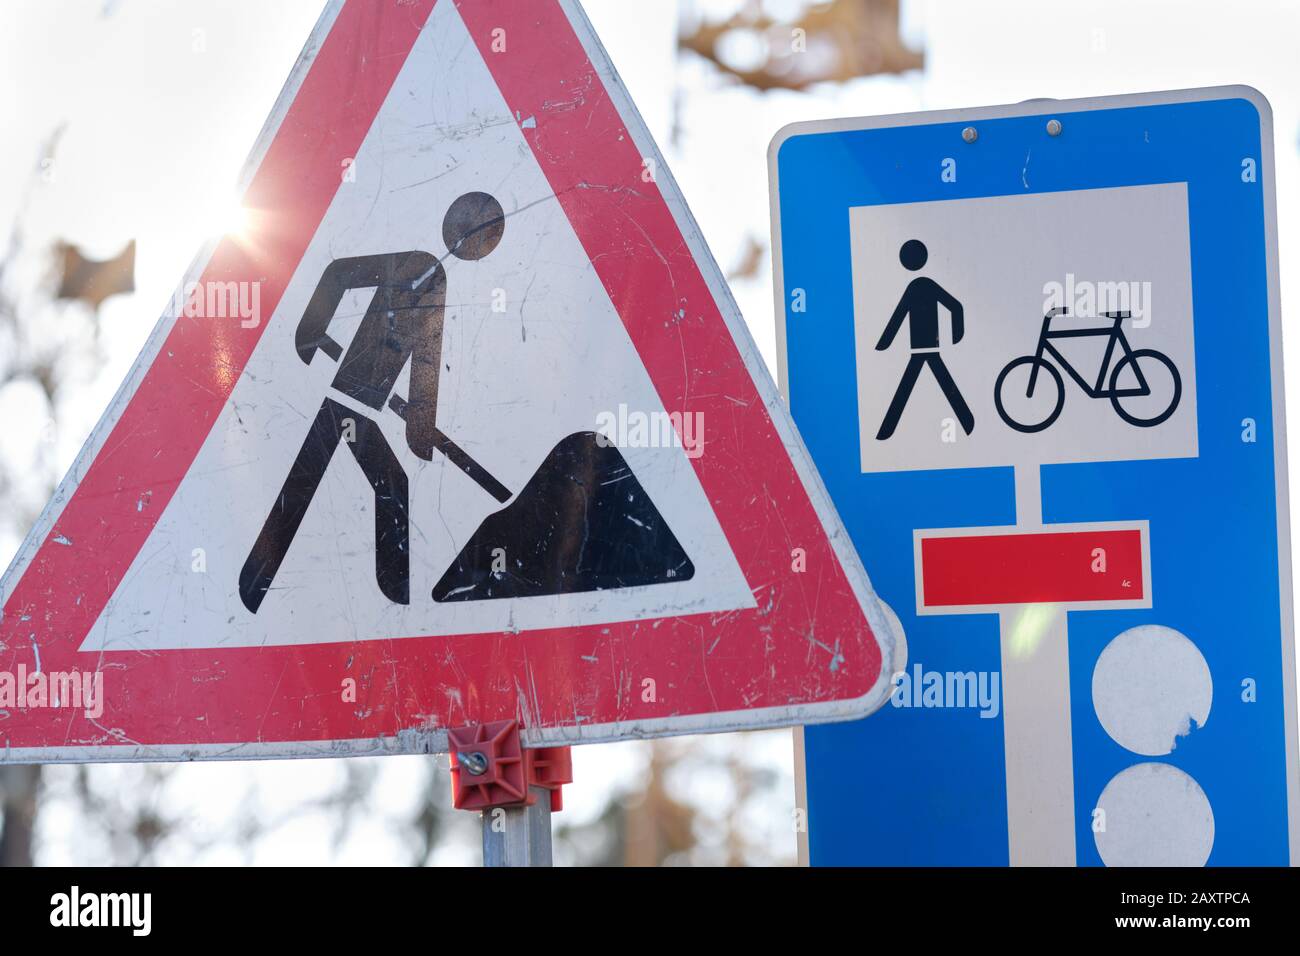 Traffic signs for attention construction site and for dead end street with footpath and cycle path against the bright white sky. Seen in Germany in Fe Stock Photo